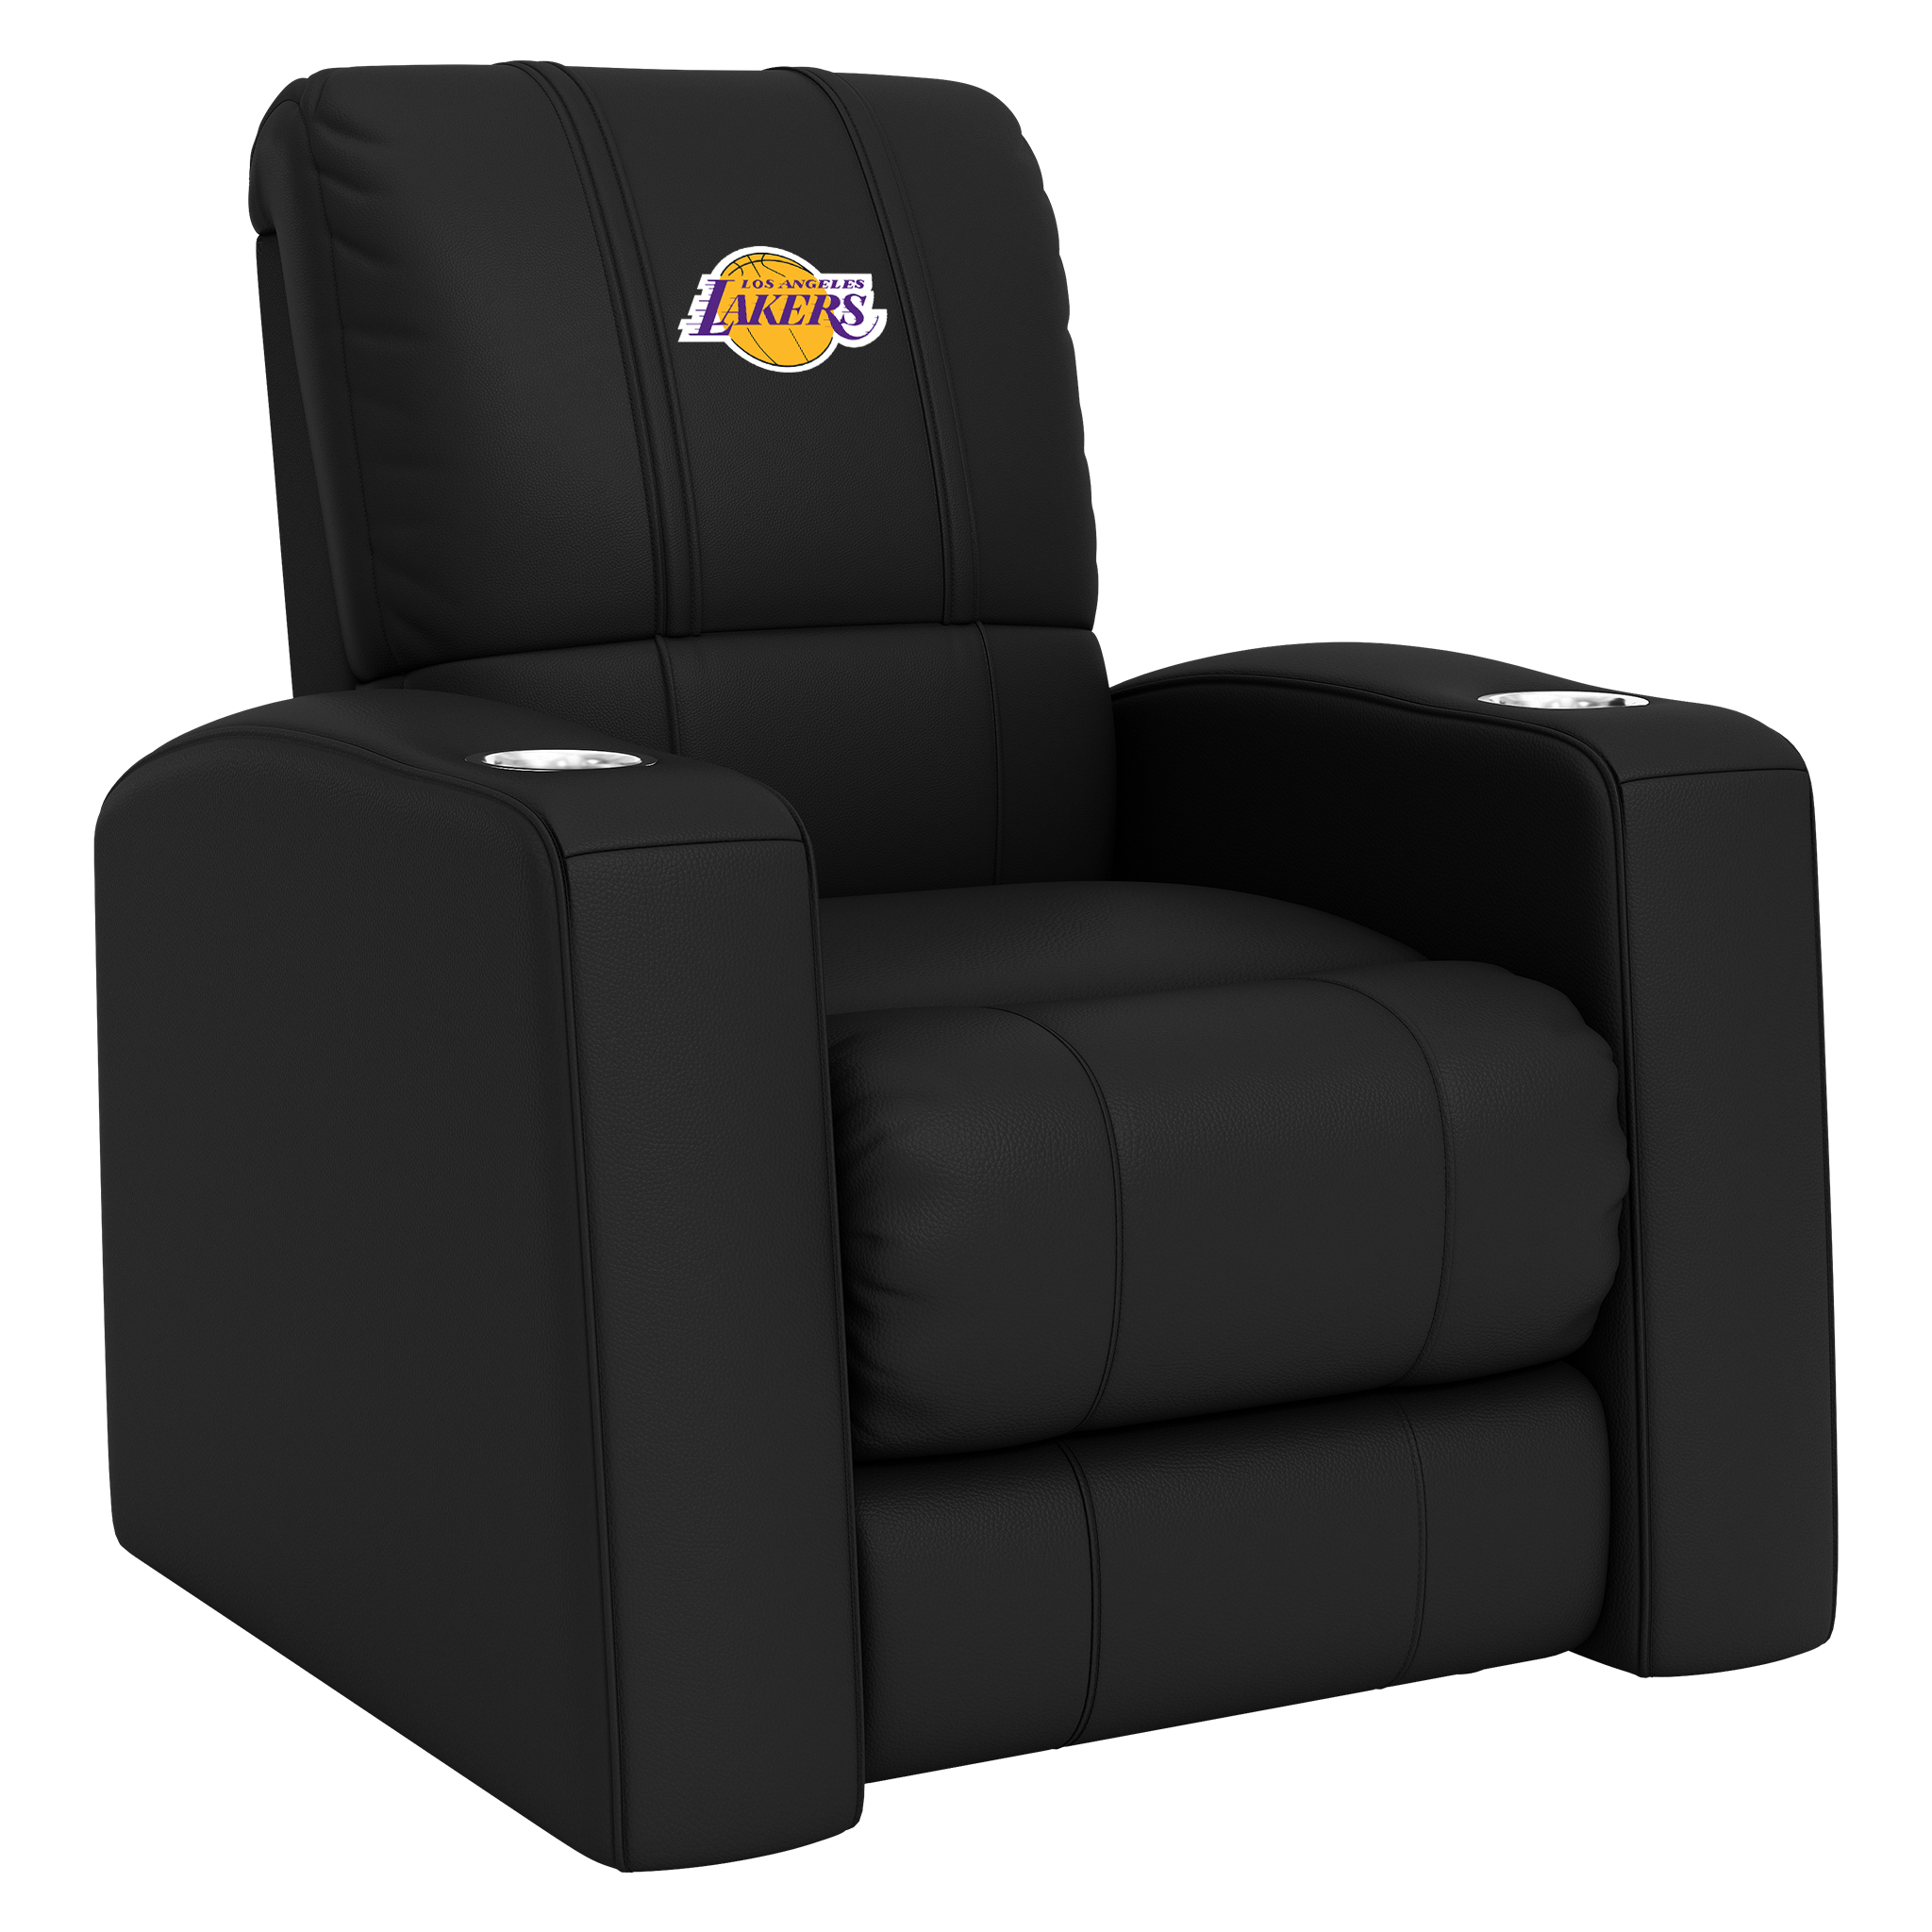 Los Angeles Lakers Home Theater Recliner with Los Angeles Lakers Logo